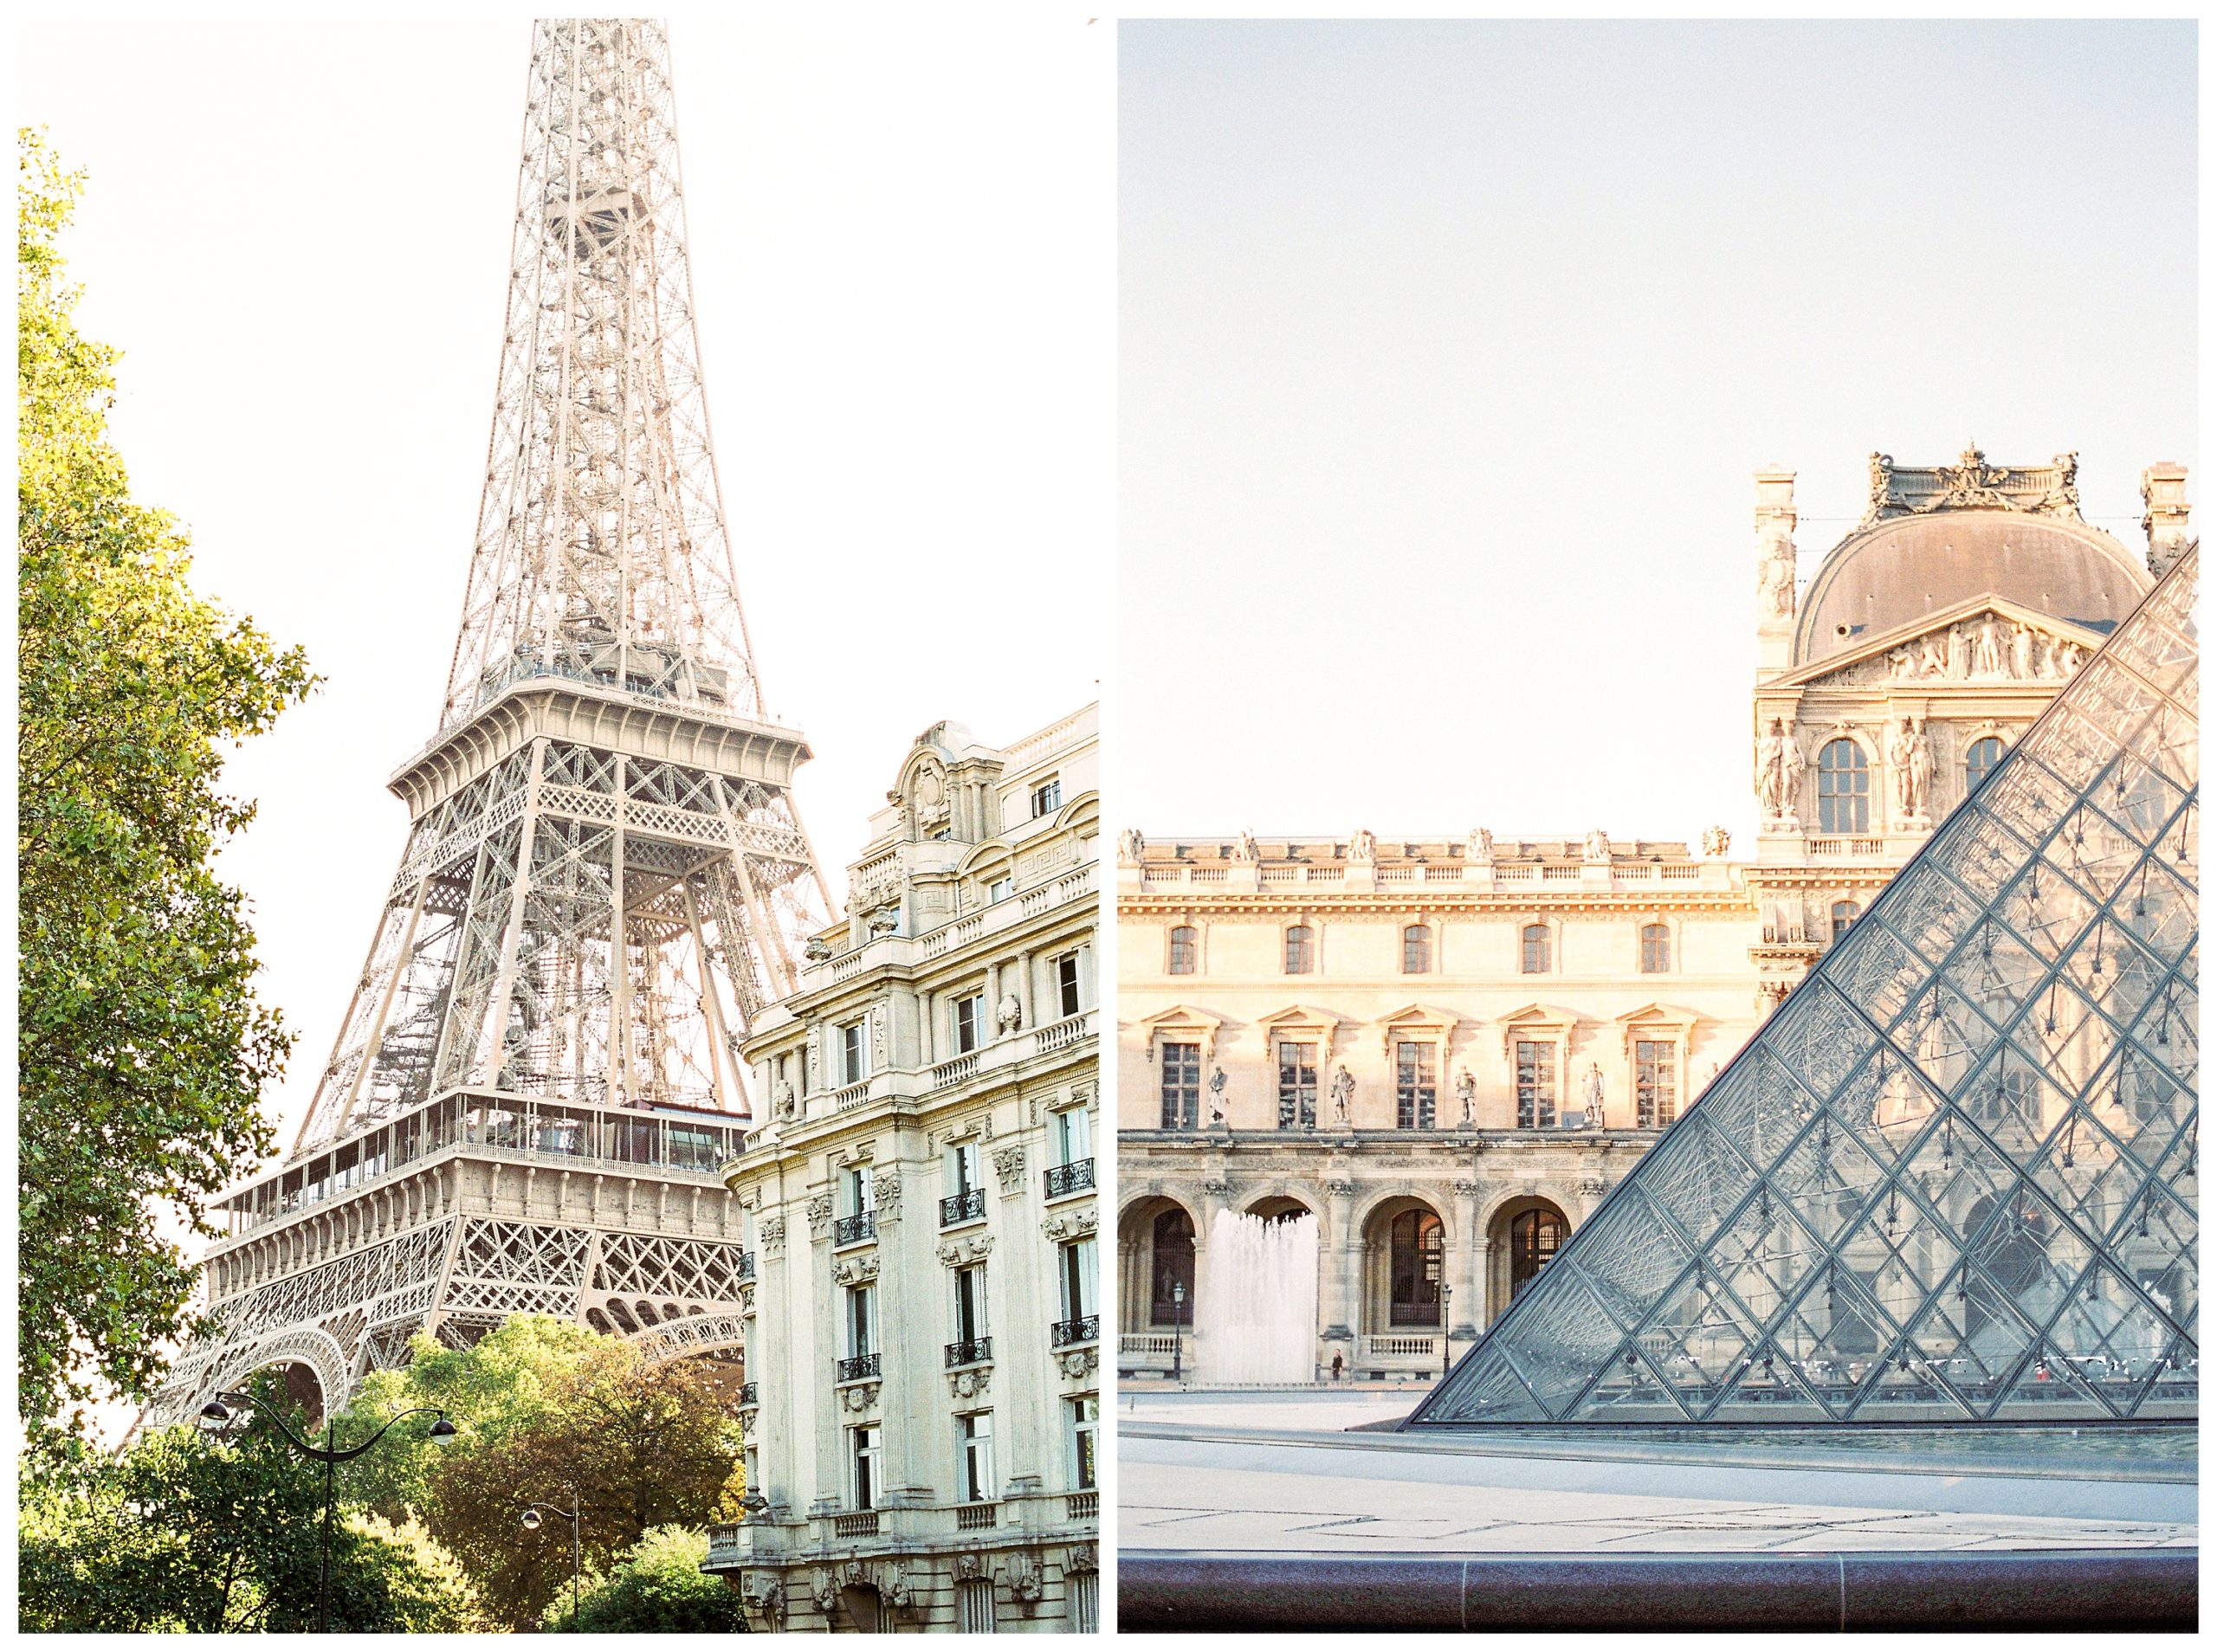 On the left: The Eiffel Tower gleams at sunrise from the Quai de Branly in Paris, as sunlight gleams off the treetops. On the right: The morning sunlight pours into the courtyard of the Louvre with the iconic glass pyramid in the center.